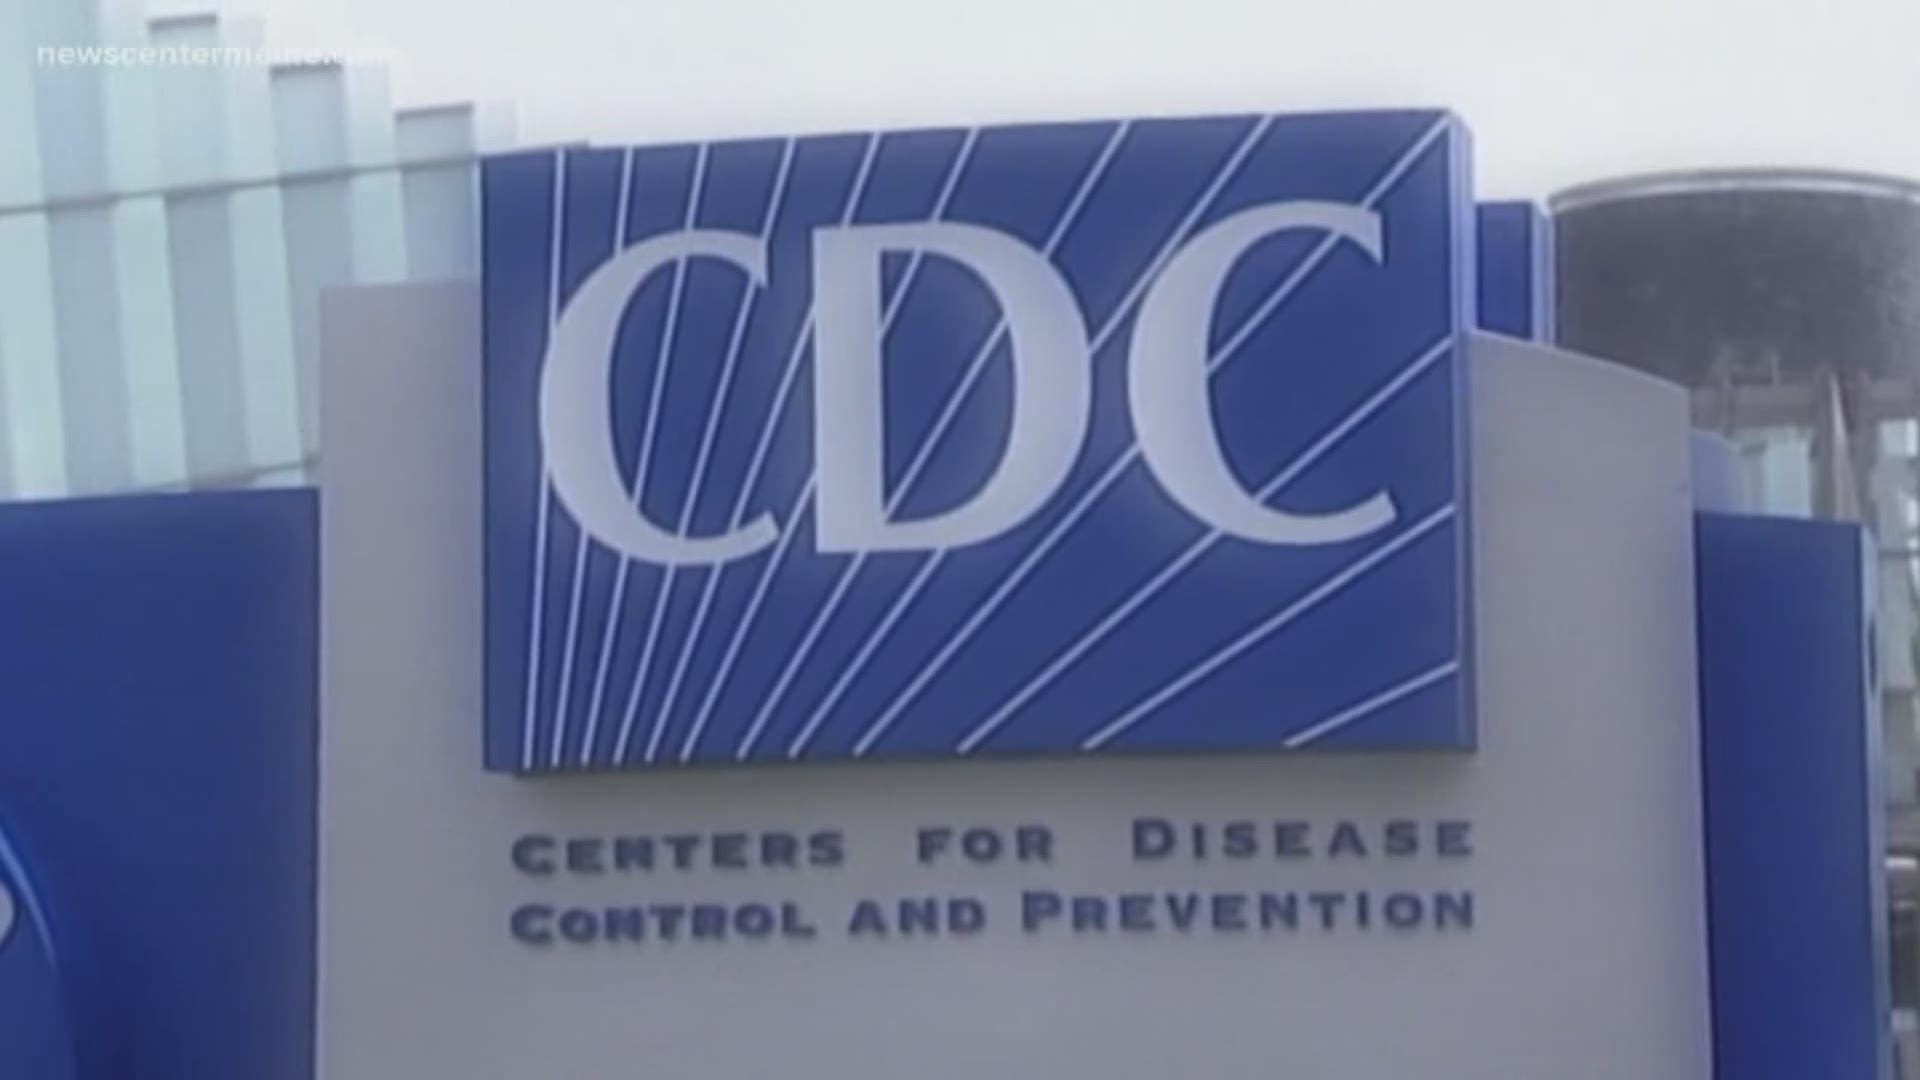 According to the Maine CDC, there has been a large spike in some STIs in the state.